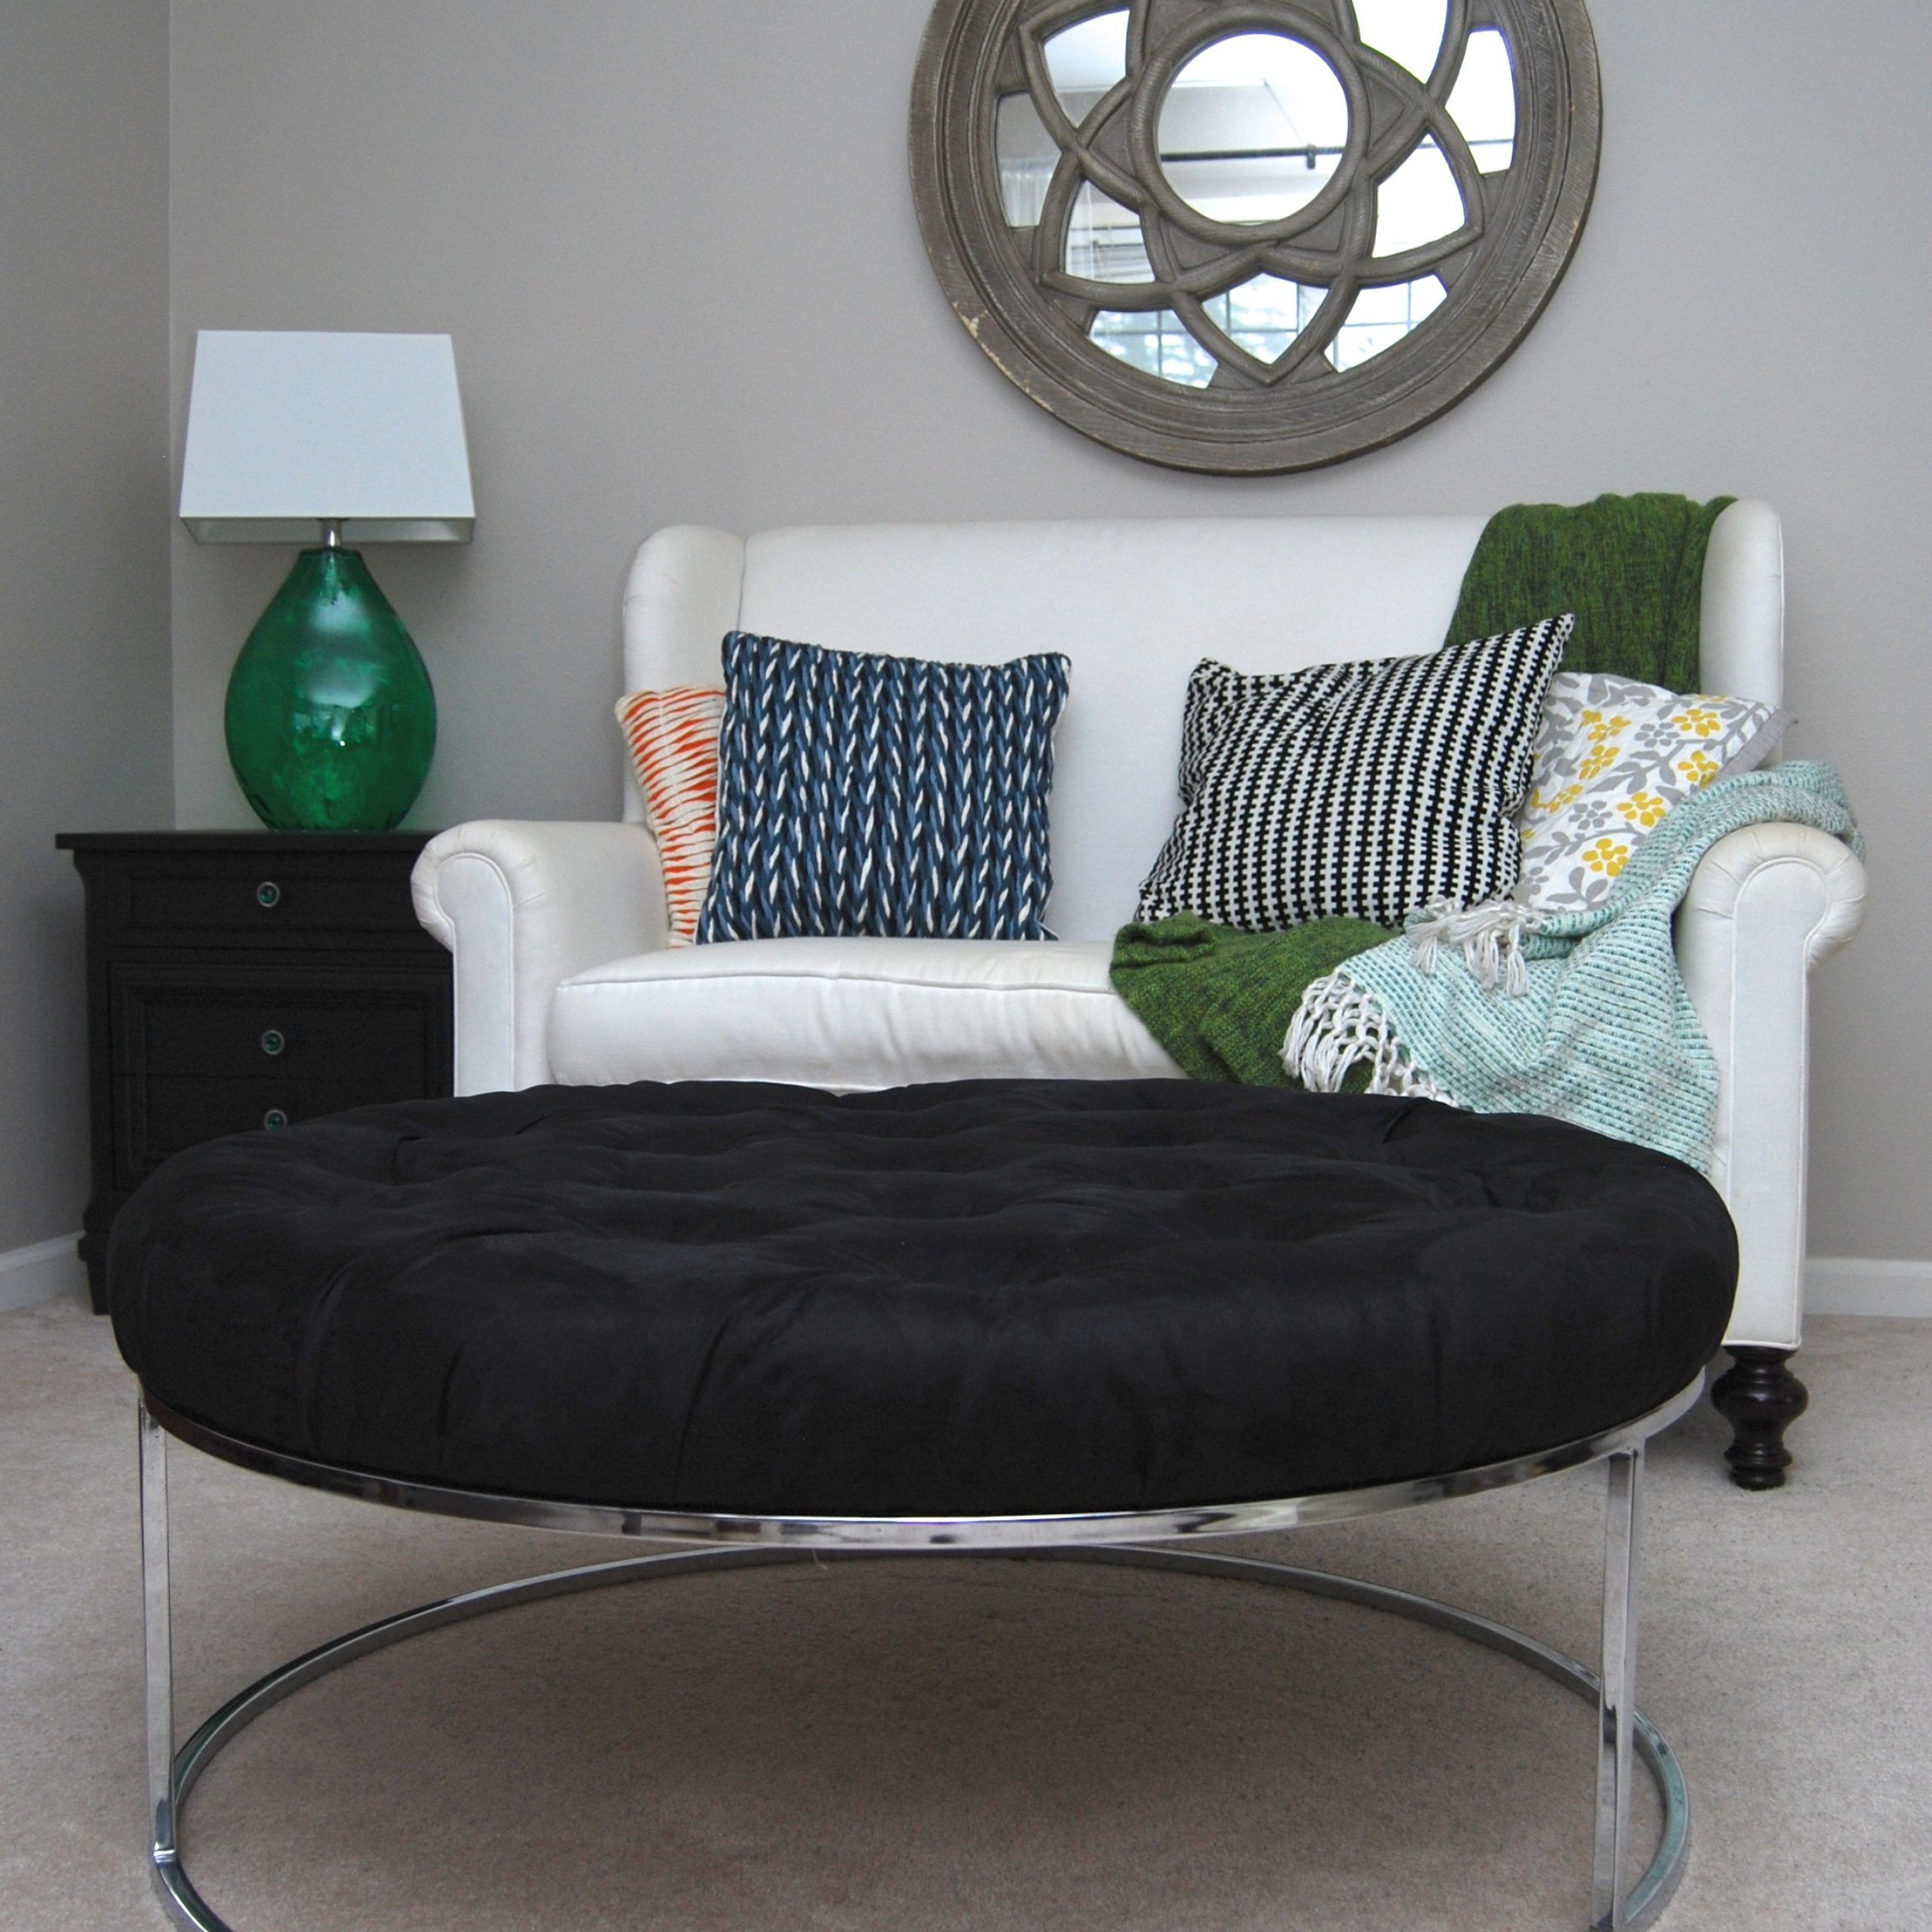 A Round, Black Tufted Ottoman With A Chrome Base – The Weathered Door In Weathered Wood Ottomans (View 5 of 20)